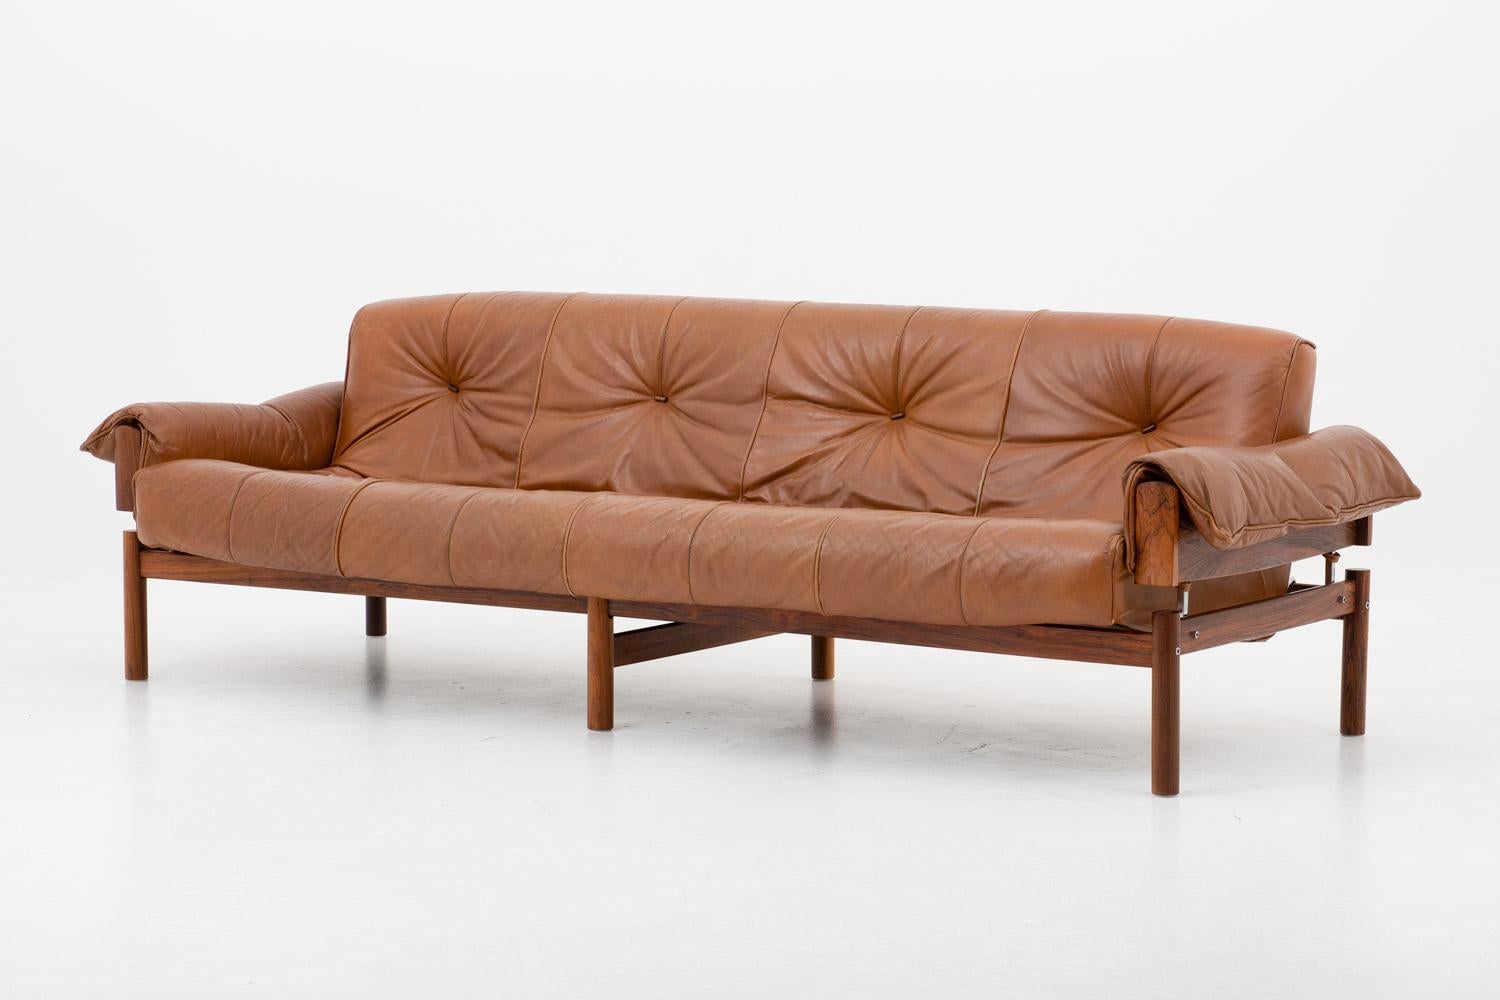 Four-seat sofa by Percival Lafer, Brazil, 1960s. 
This sofa consists of a rosewood frame upon which the cushions rest. The cushions are upholstered in brown leather with buttons of rosewood on the seating and backrest. The armrests are held in